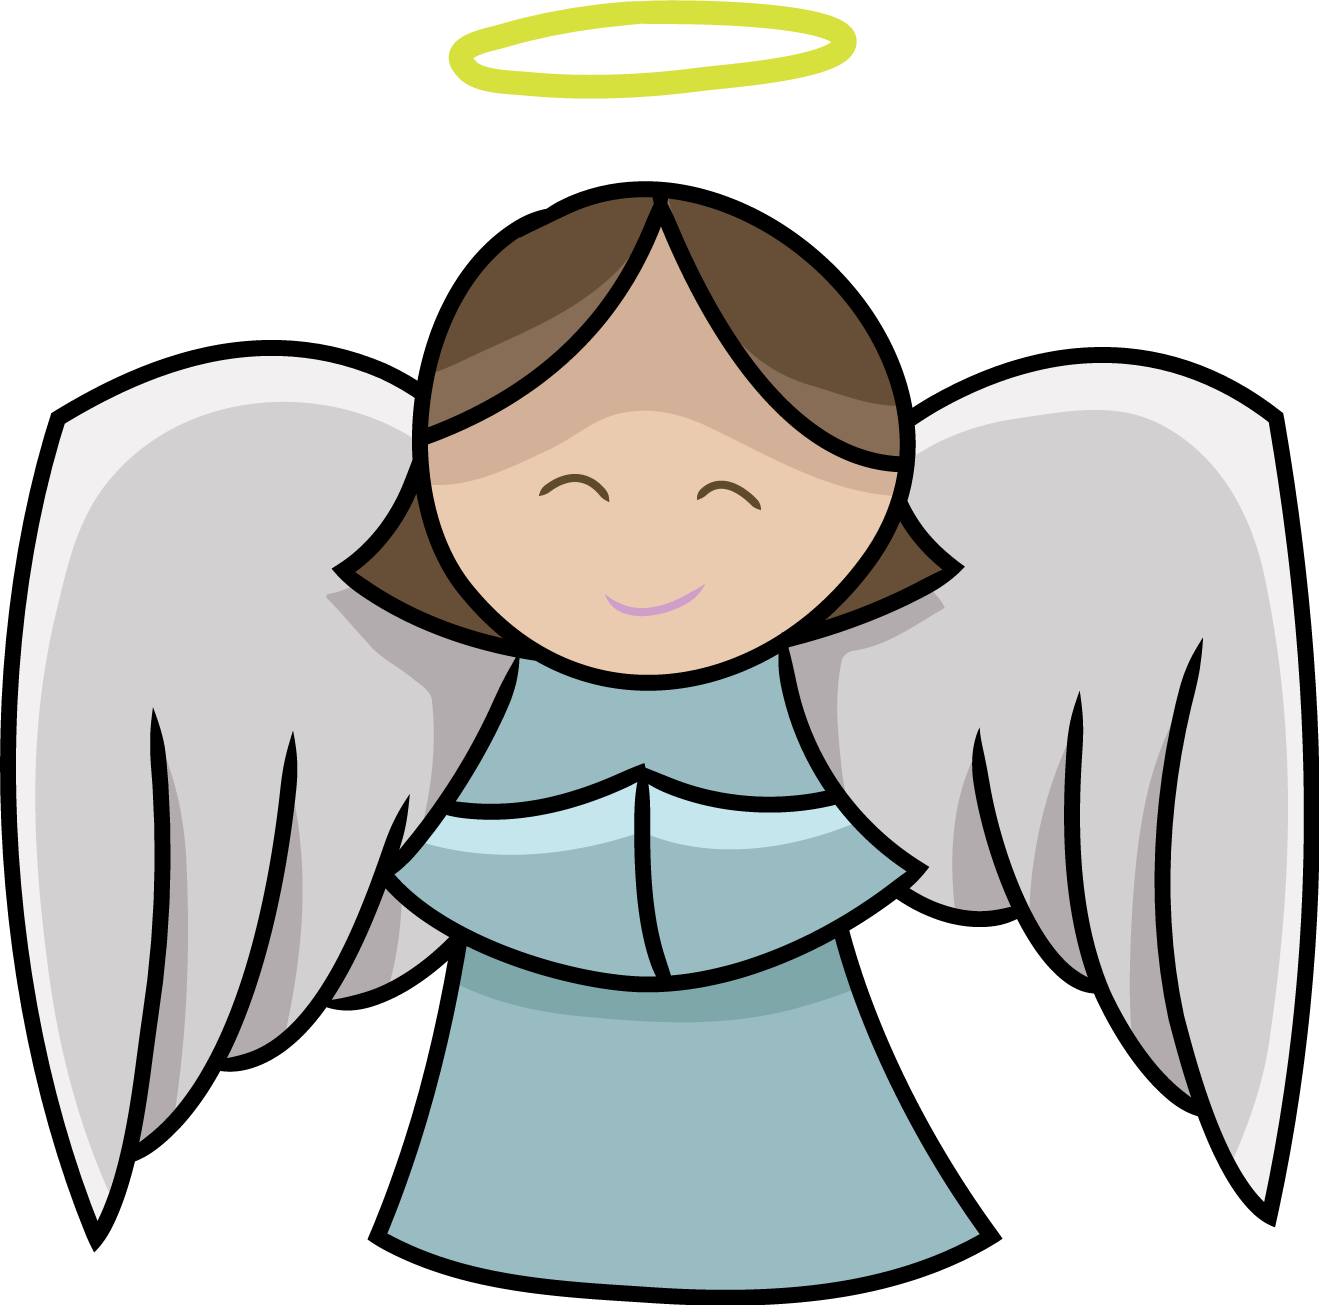 Image of Angel Clipart #1836, Angel Clip Art Images Free For ...